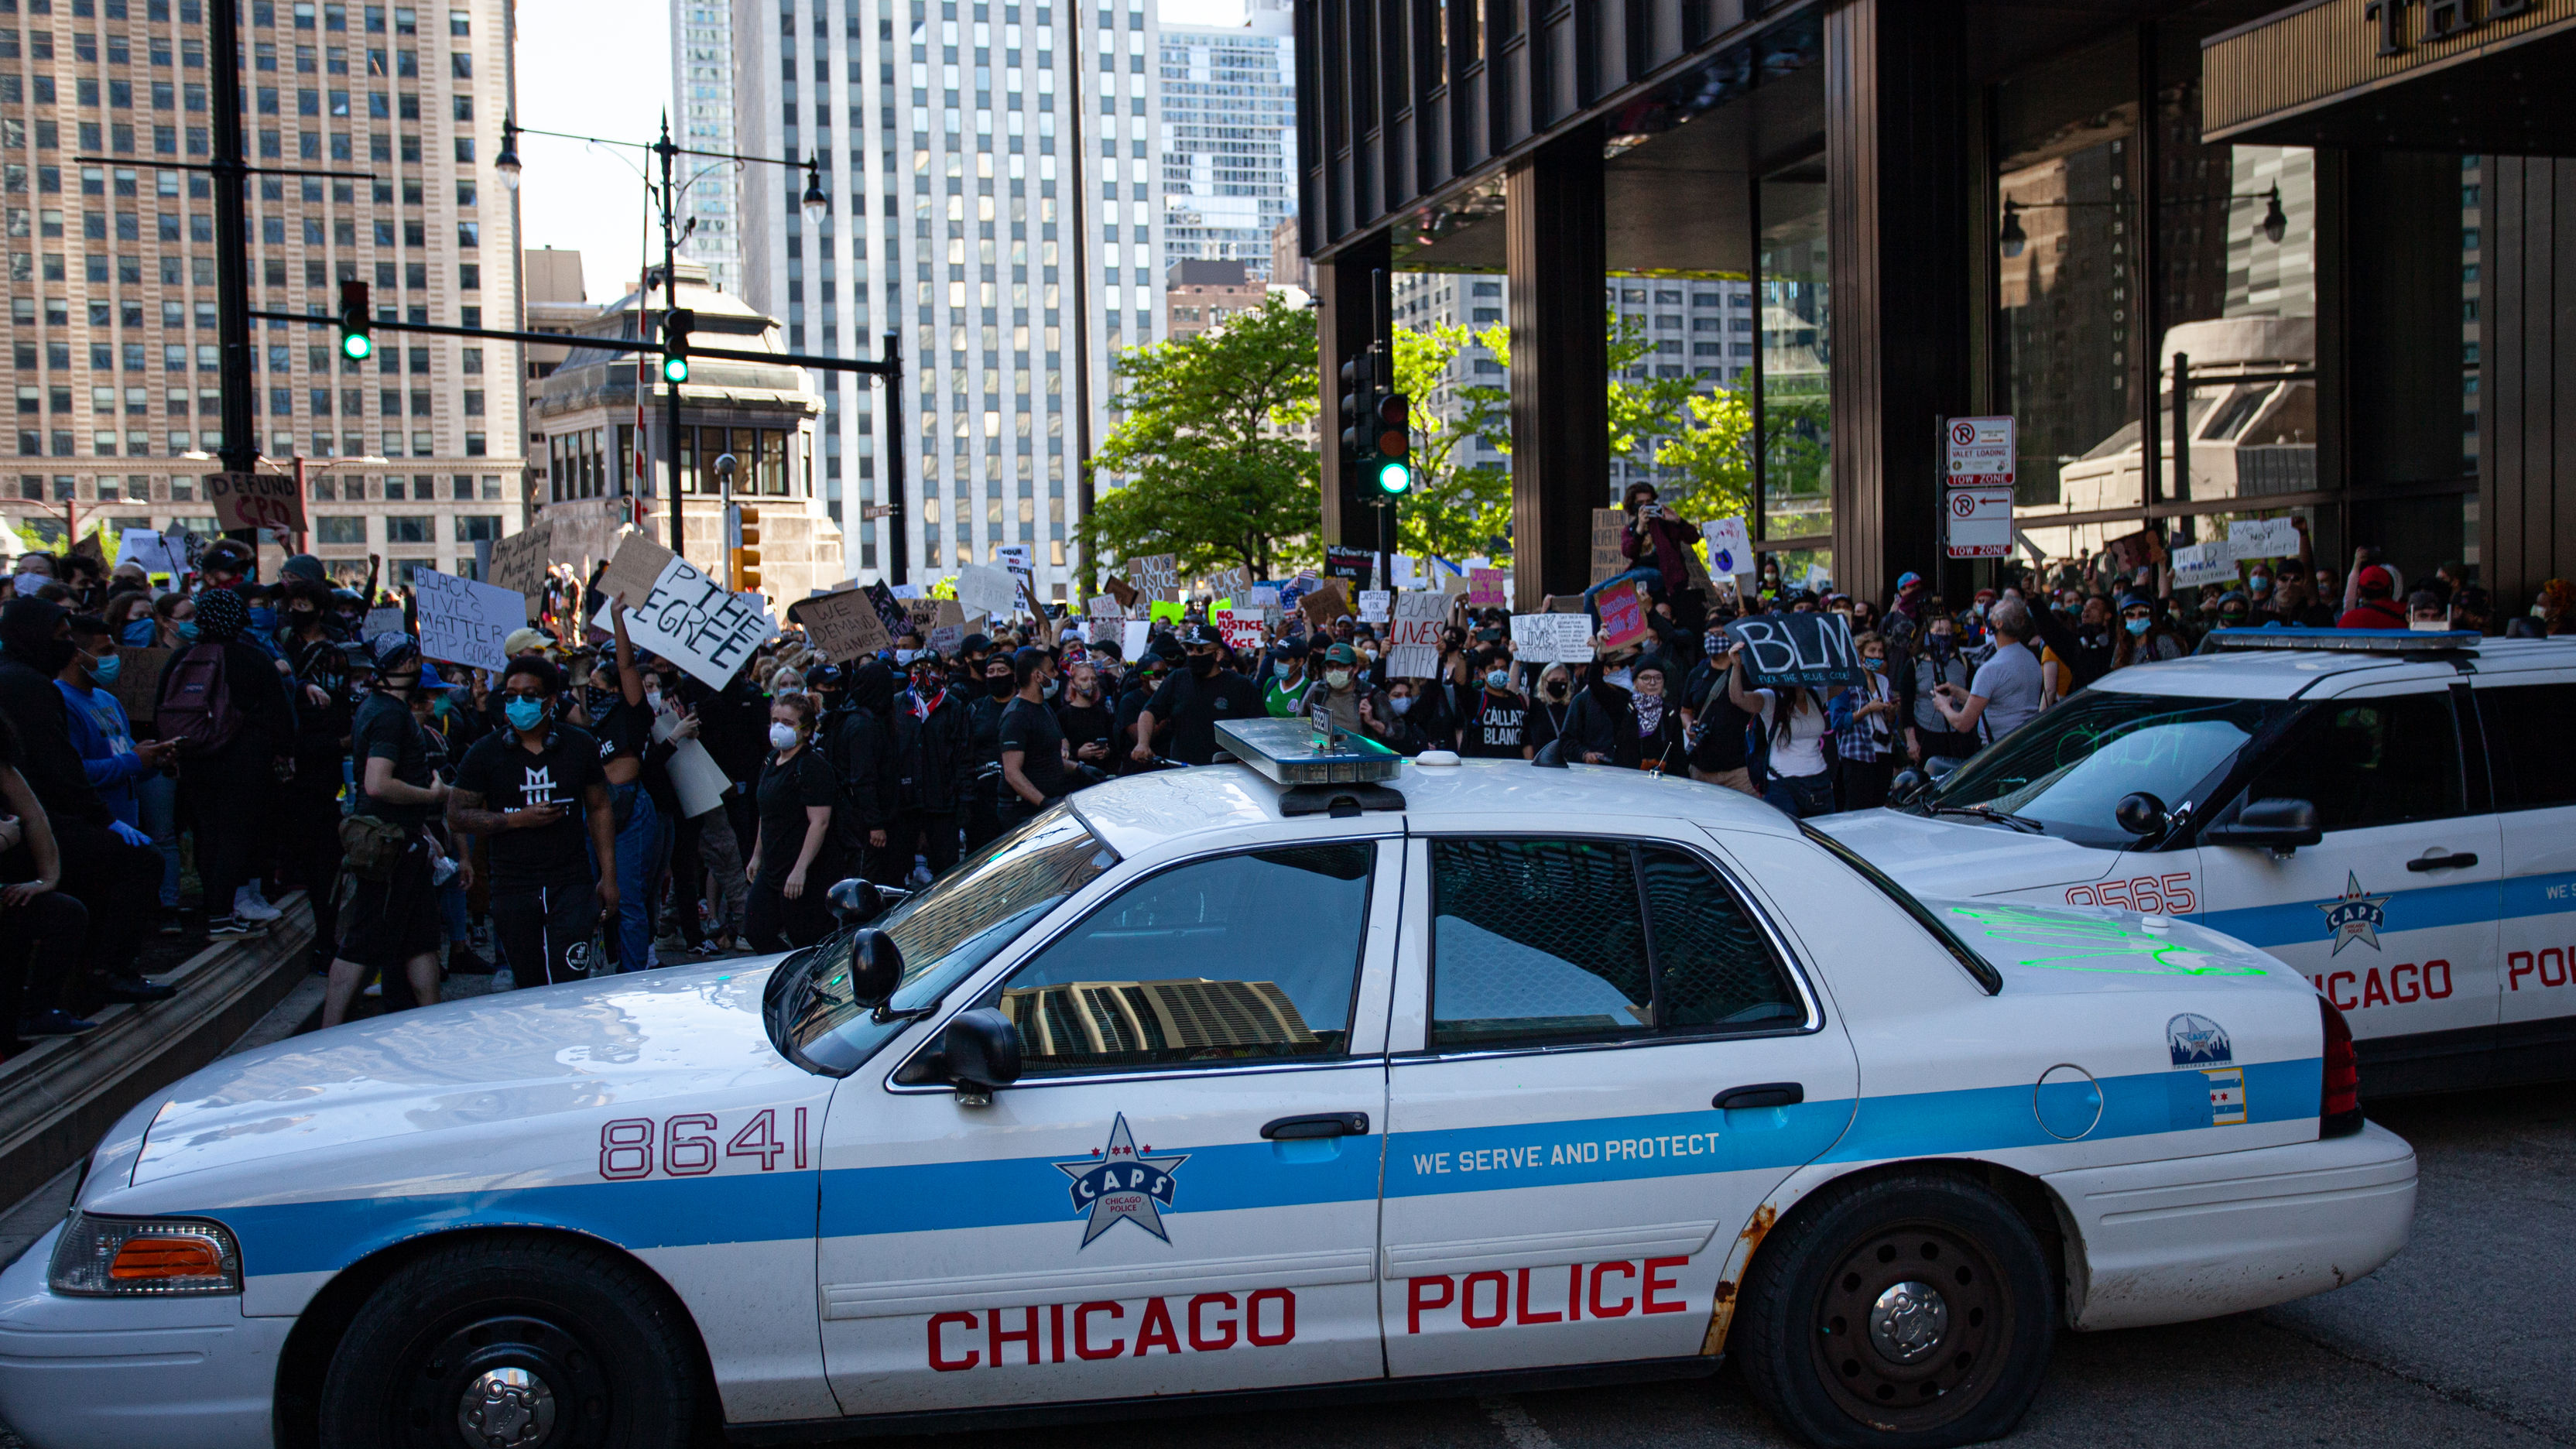 Behind a Chicago Police Department car, protestors rally for racial justice.